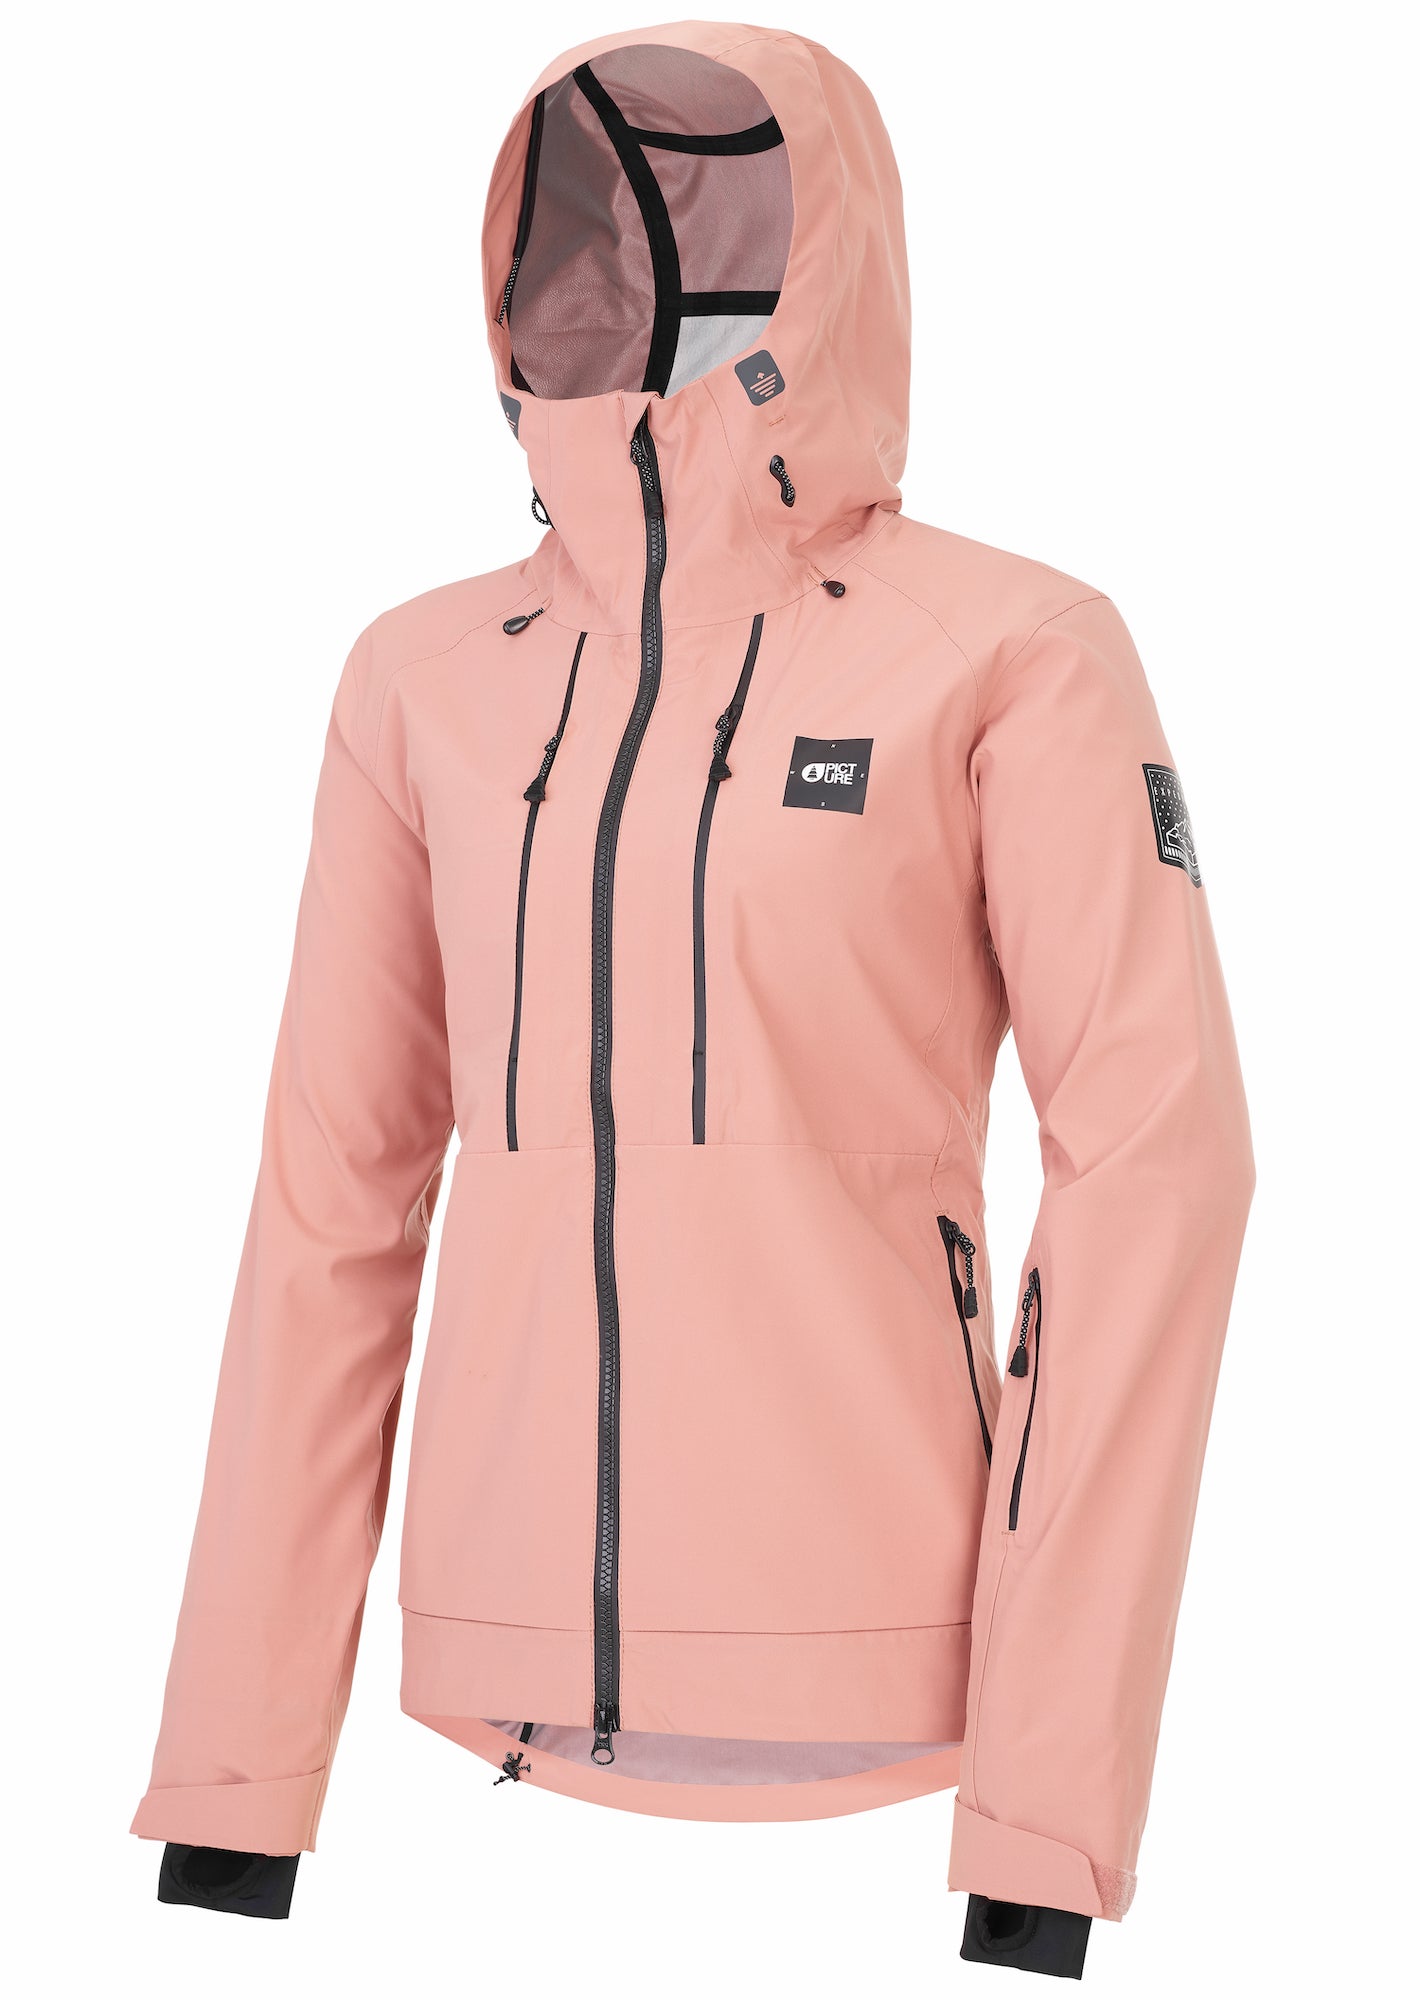 Best Women's Ski Gear  Best snowsports clothes for 2020 reviewed